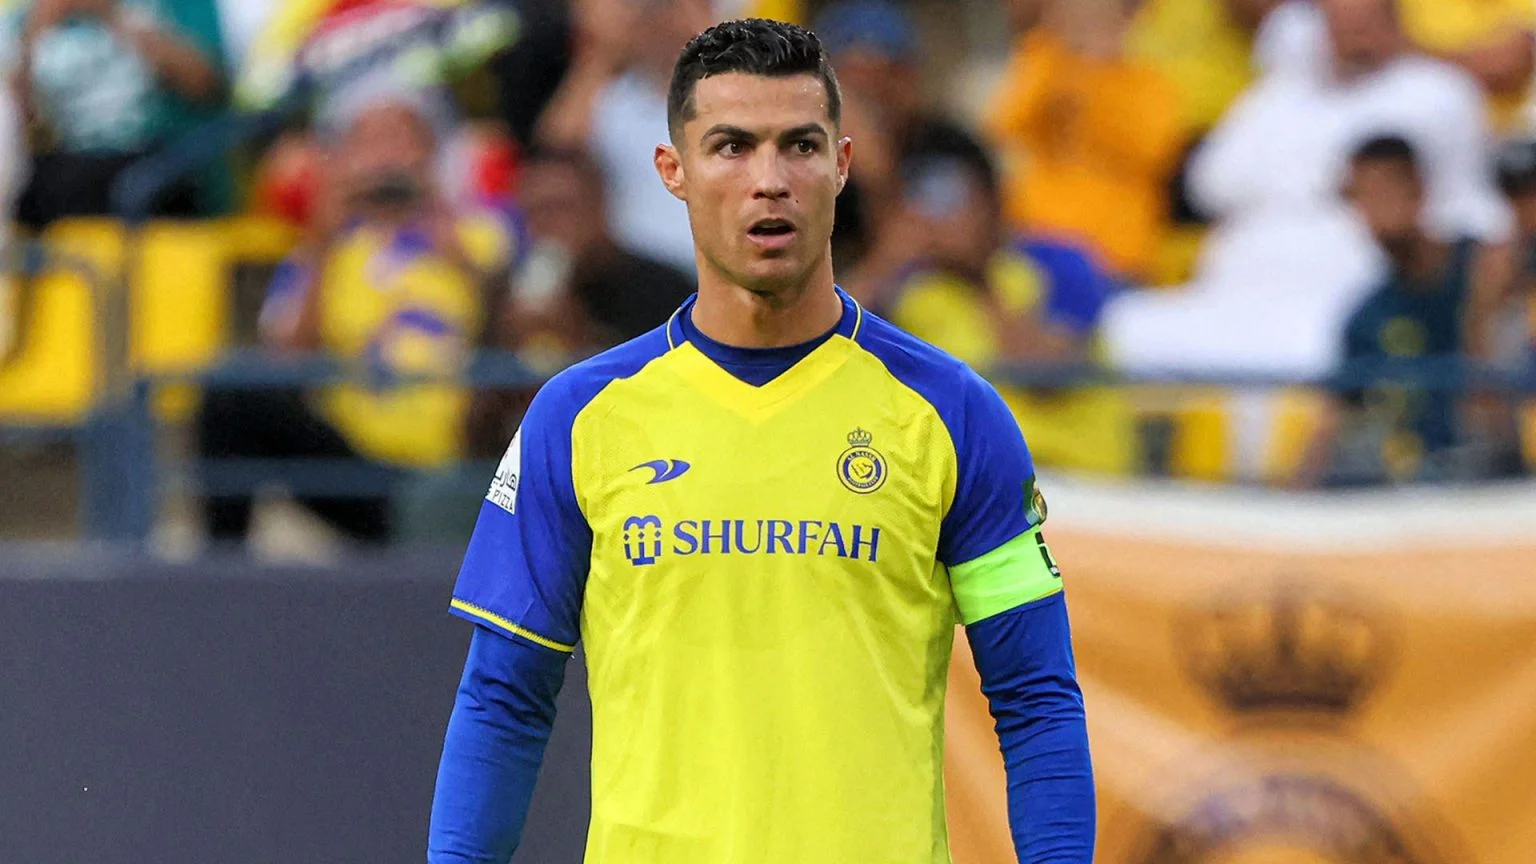 Cristiano Ronaldo ‘wants to LEAVE Al-Nassr’ only months after joining